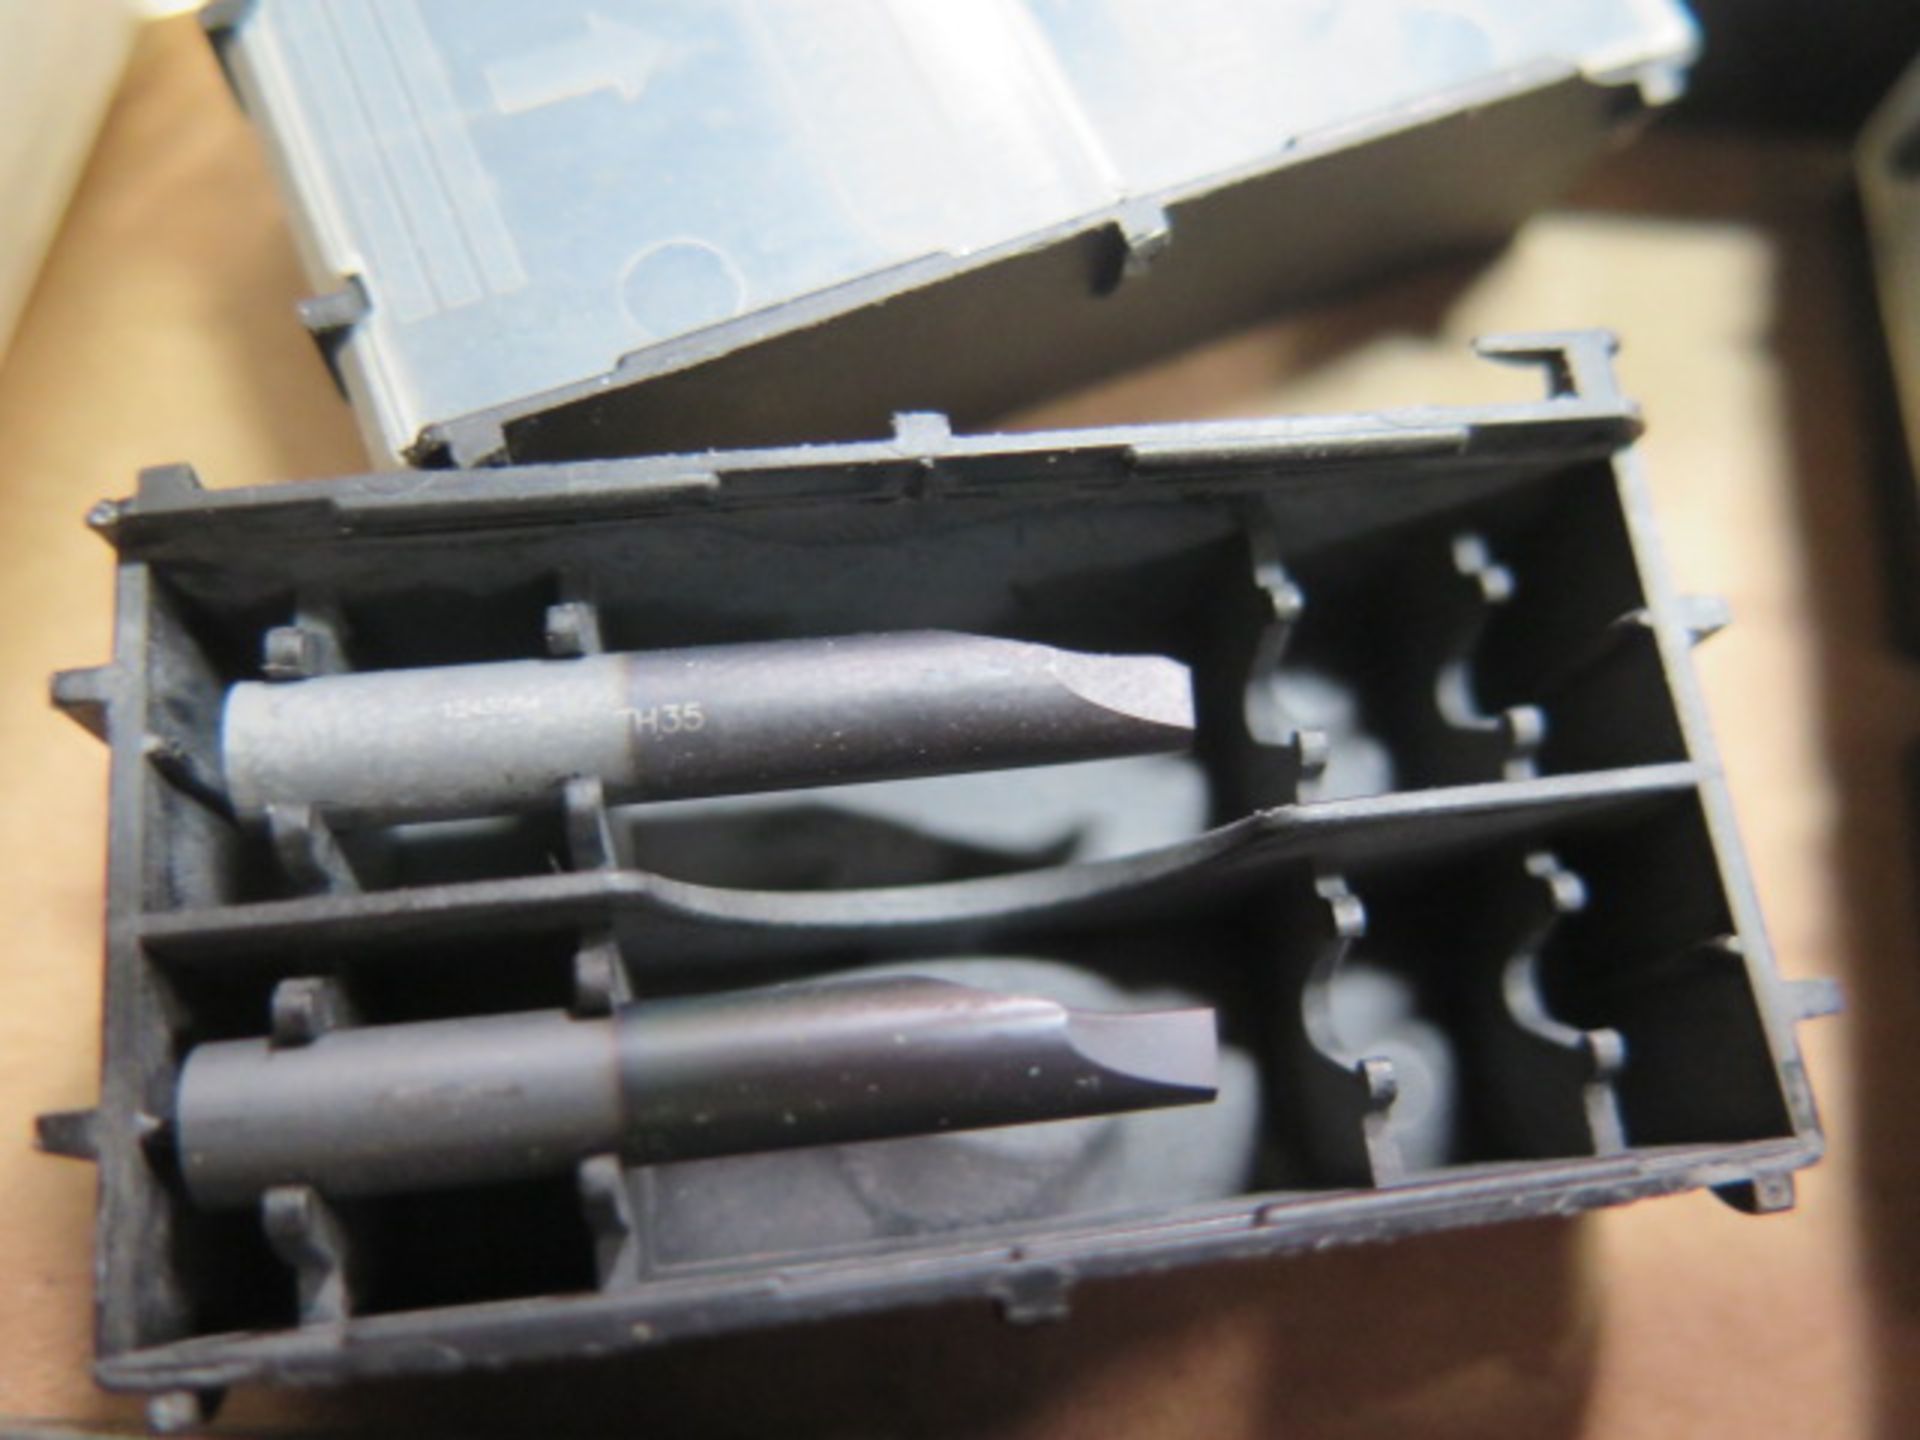 Horn Insert Boring Bars and Carbide Boring Bars (SOLD AS-IS - NO WARRANTY) - Image 6 of 7